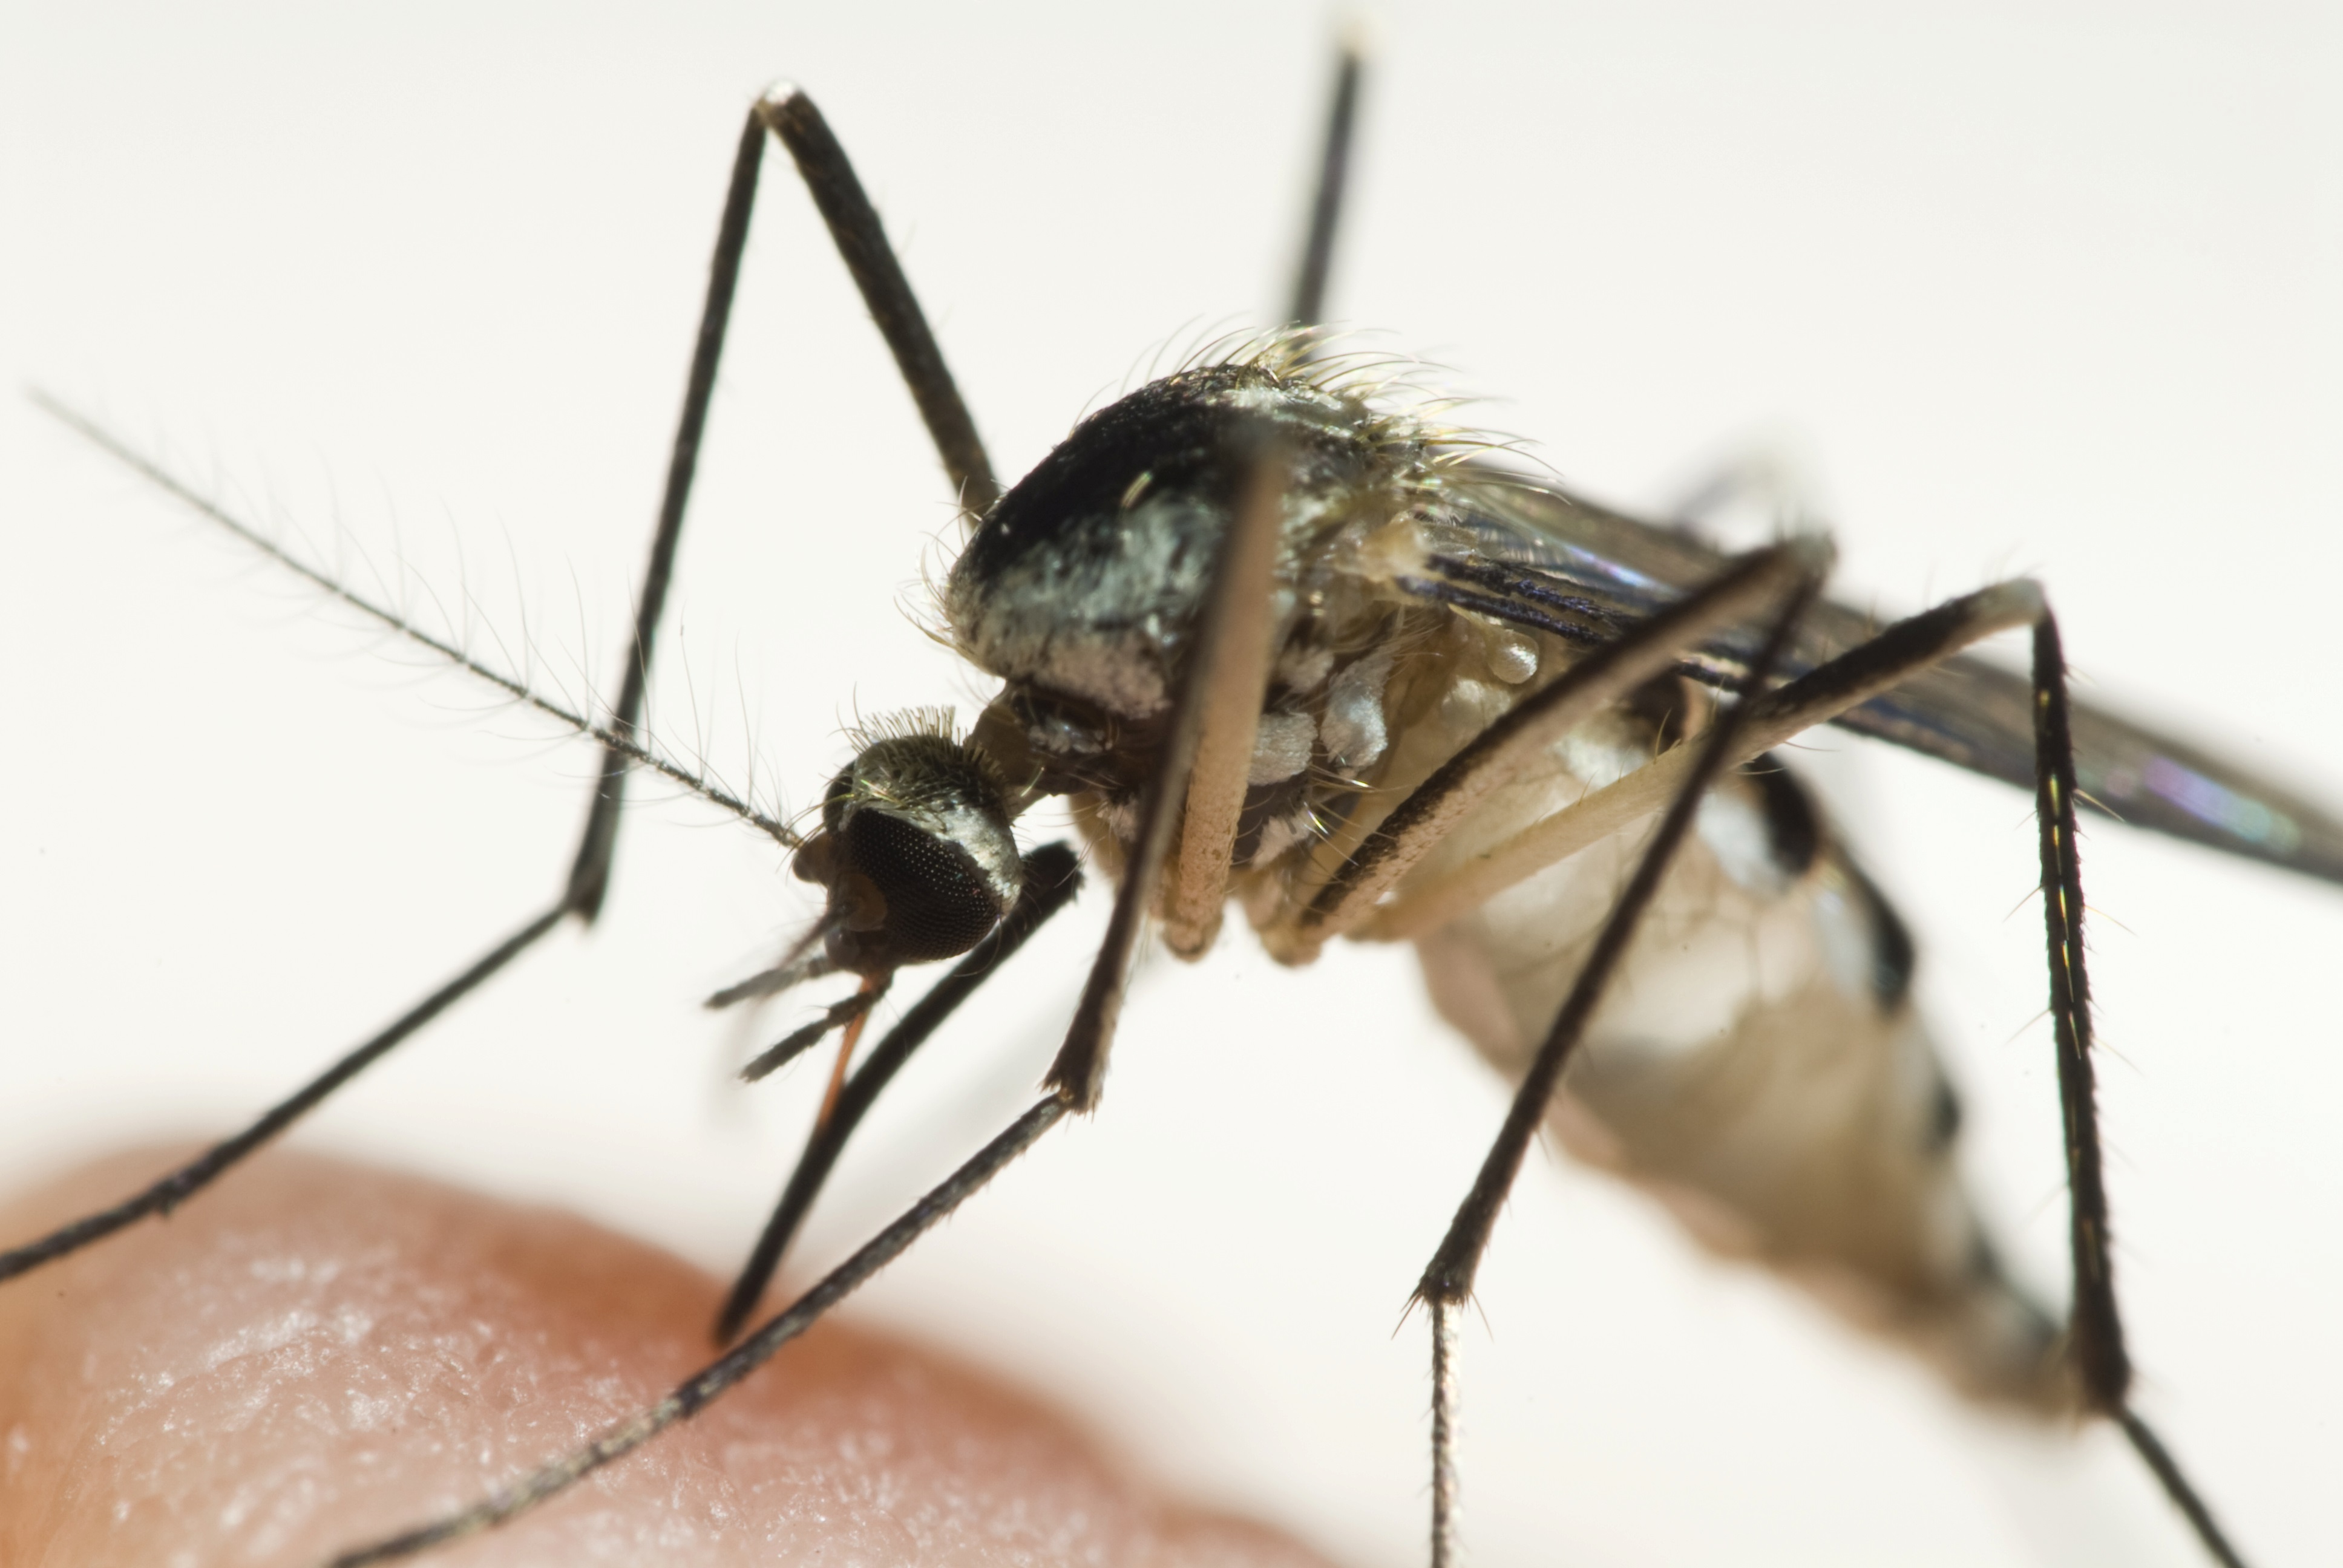 Extreme closeup of mosquito found prior to providing Mosquito Control in South Windsor